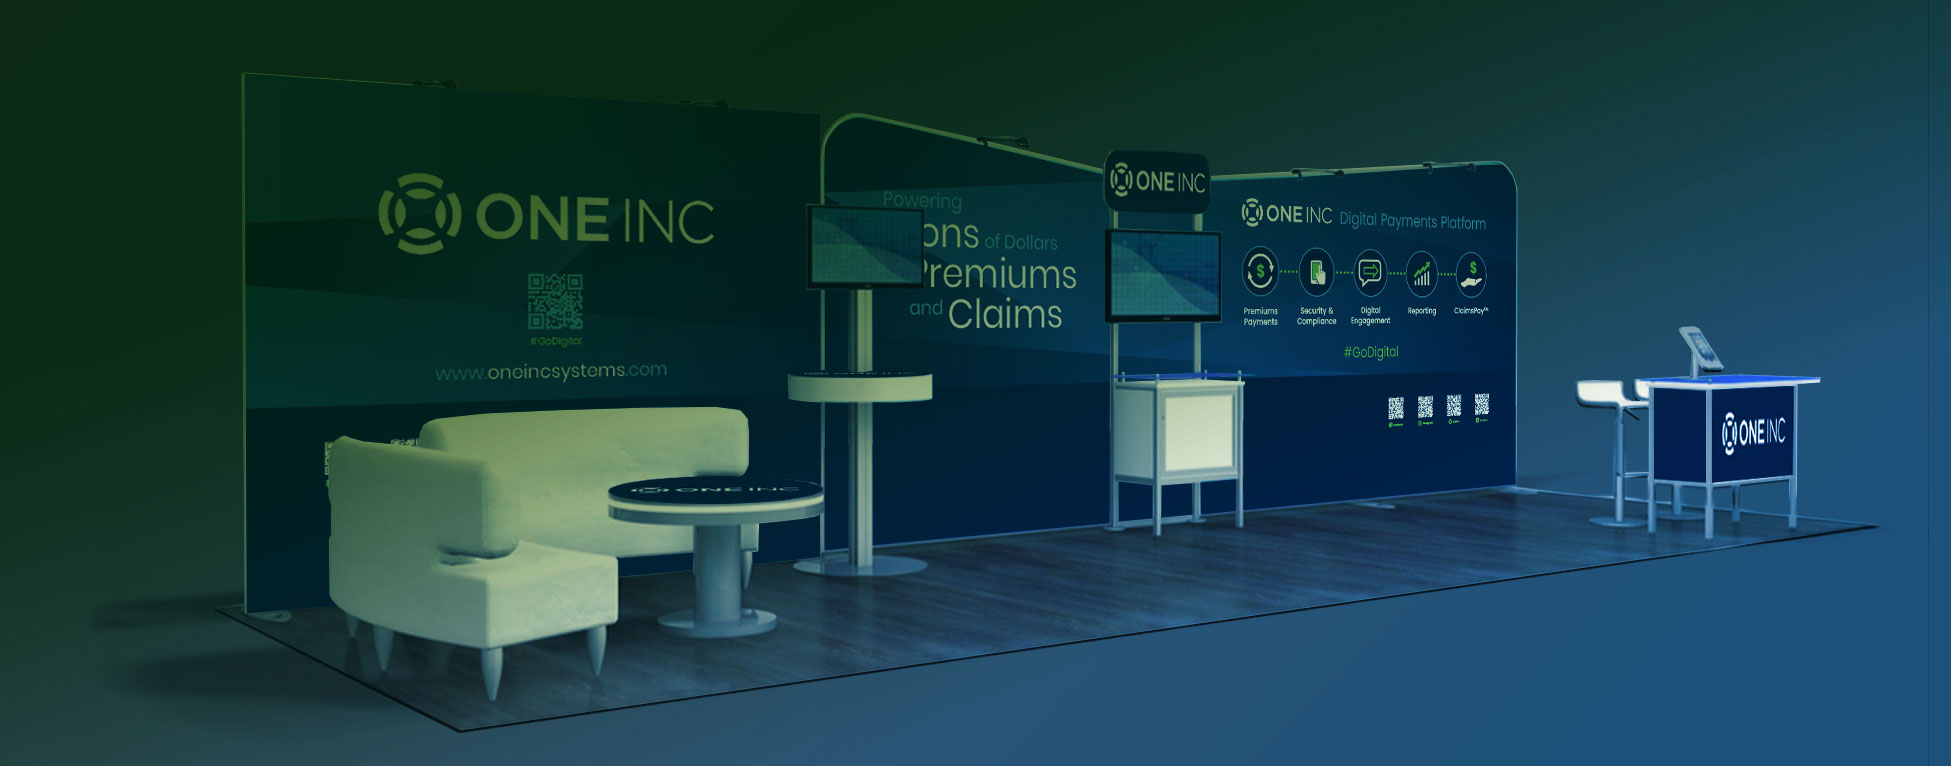 OneInc-Booth-banner